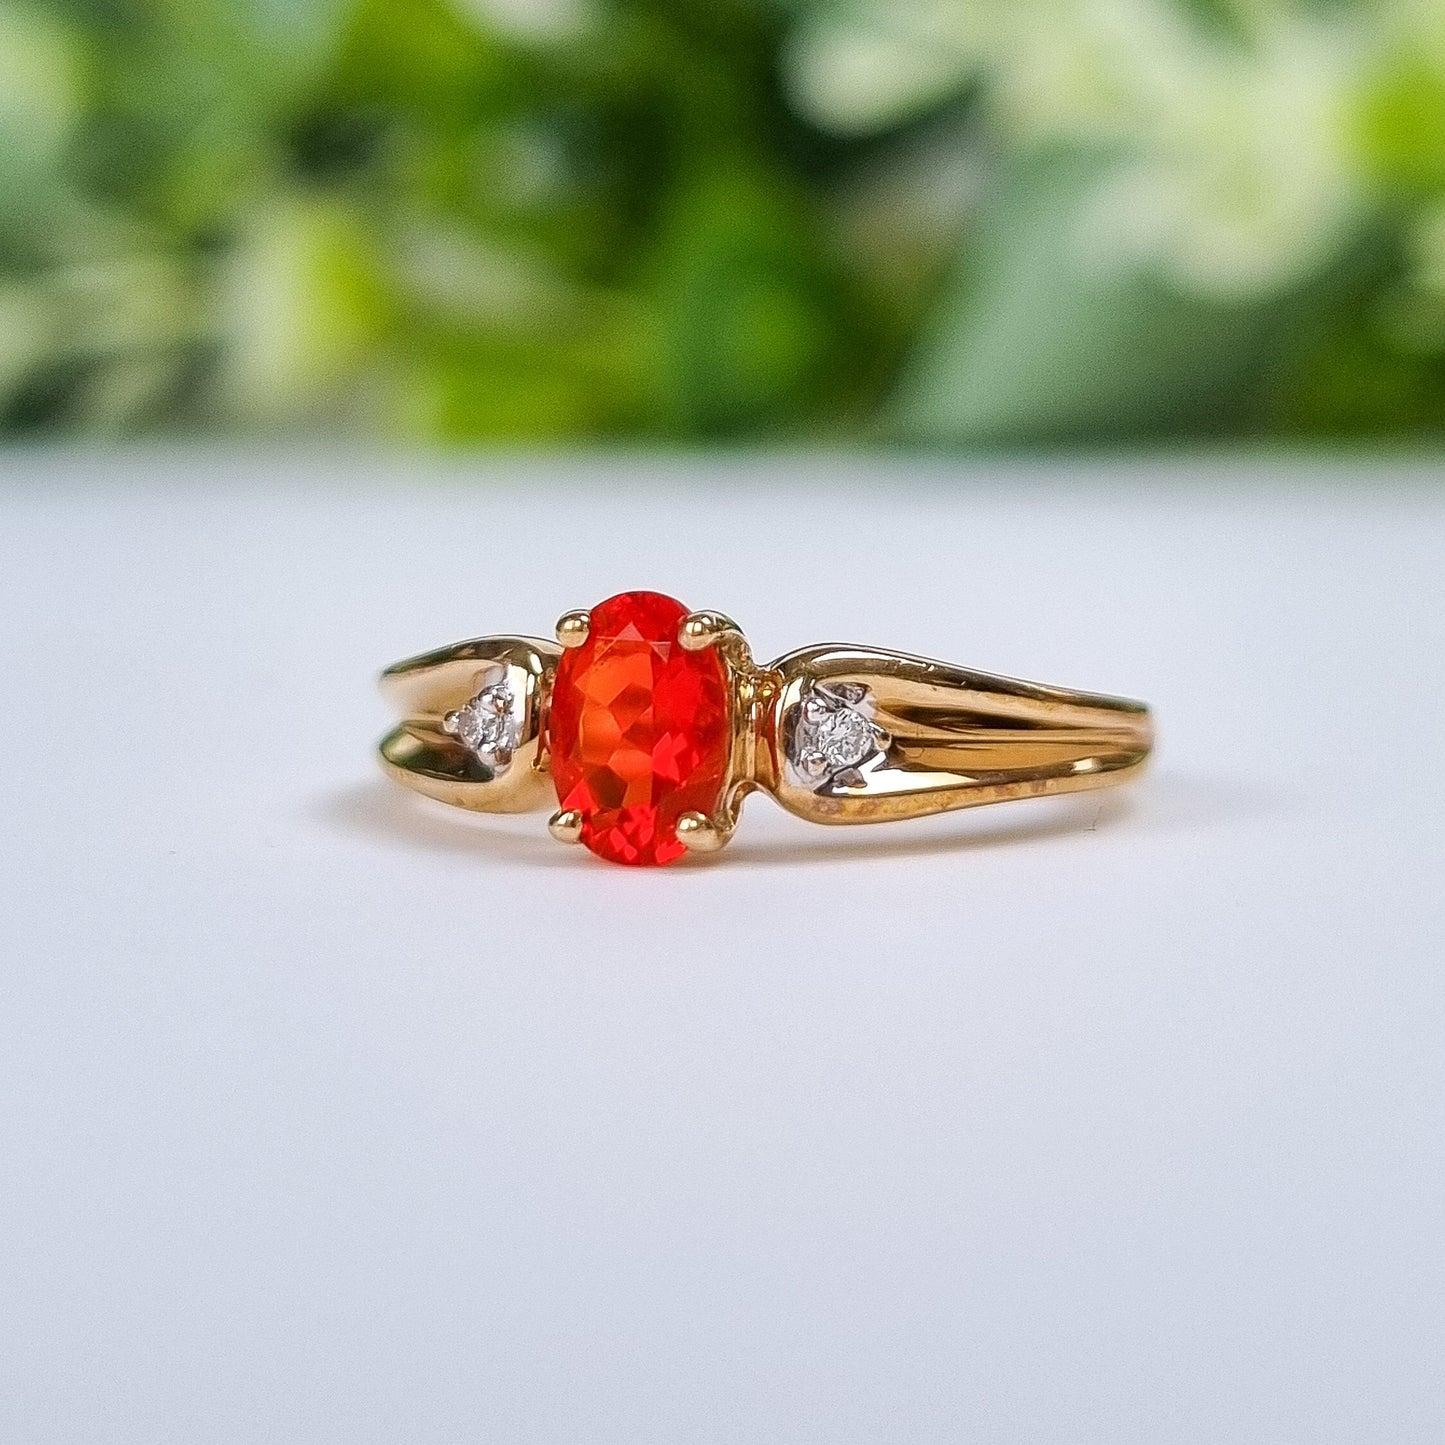 Vintage 9ct Yellow Gold Fire Opal and Diamond Solitaire Ring